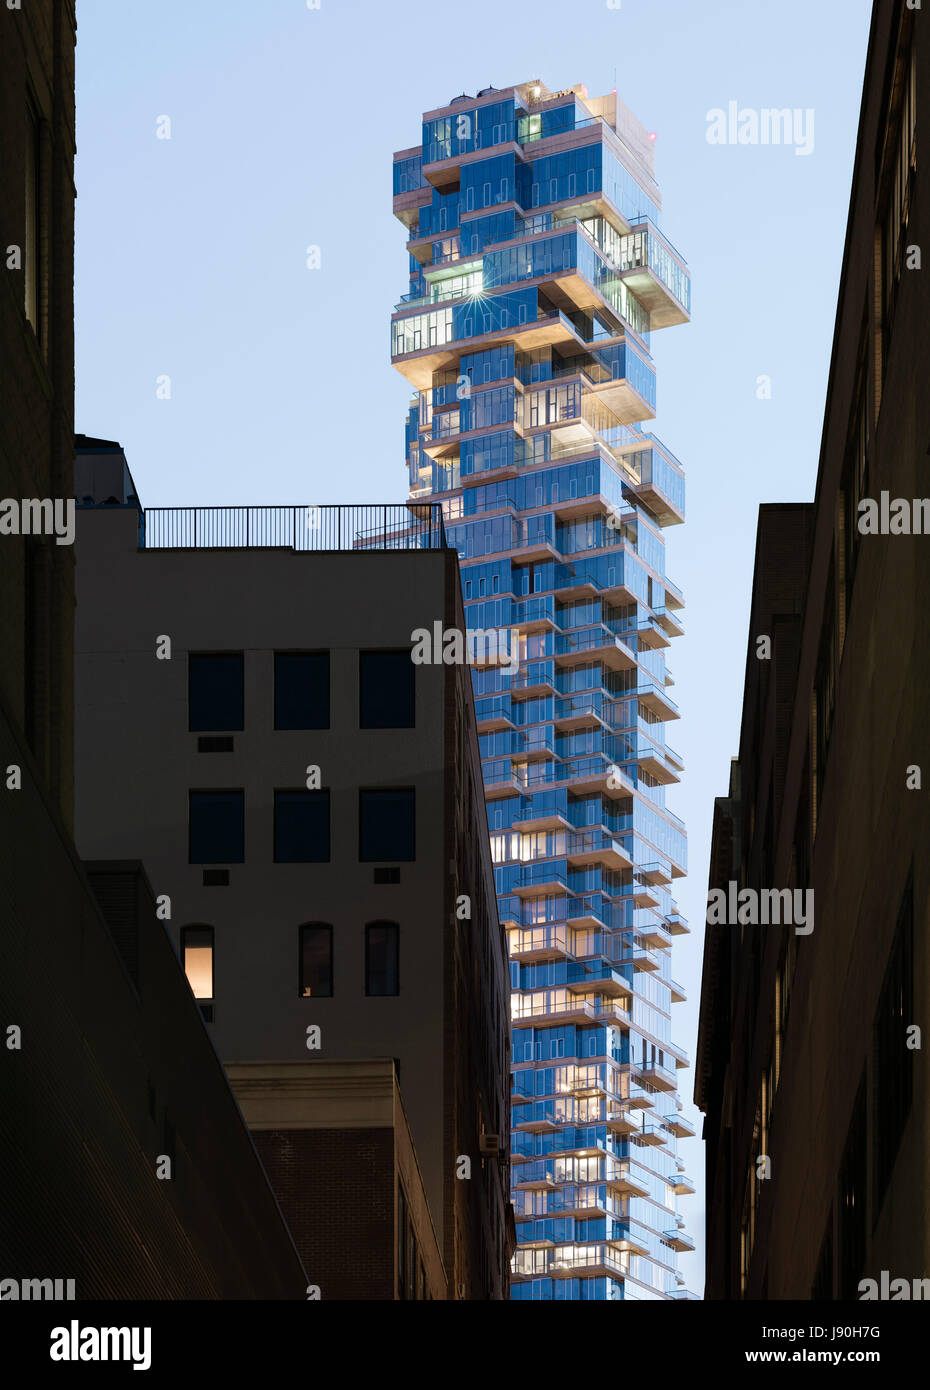 A high-rise luxury tower seen from a narrow alley in Tribeca at dusk. 56 Leonard Street, New York, United States. Architect: Herzog + de Meuron, 2017. Stock Photo